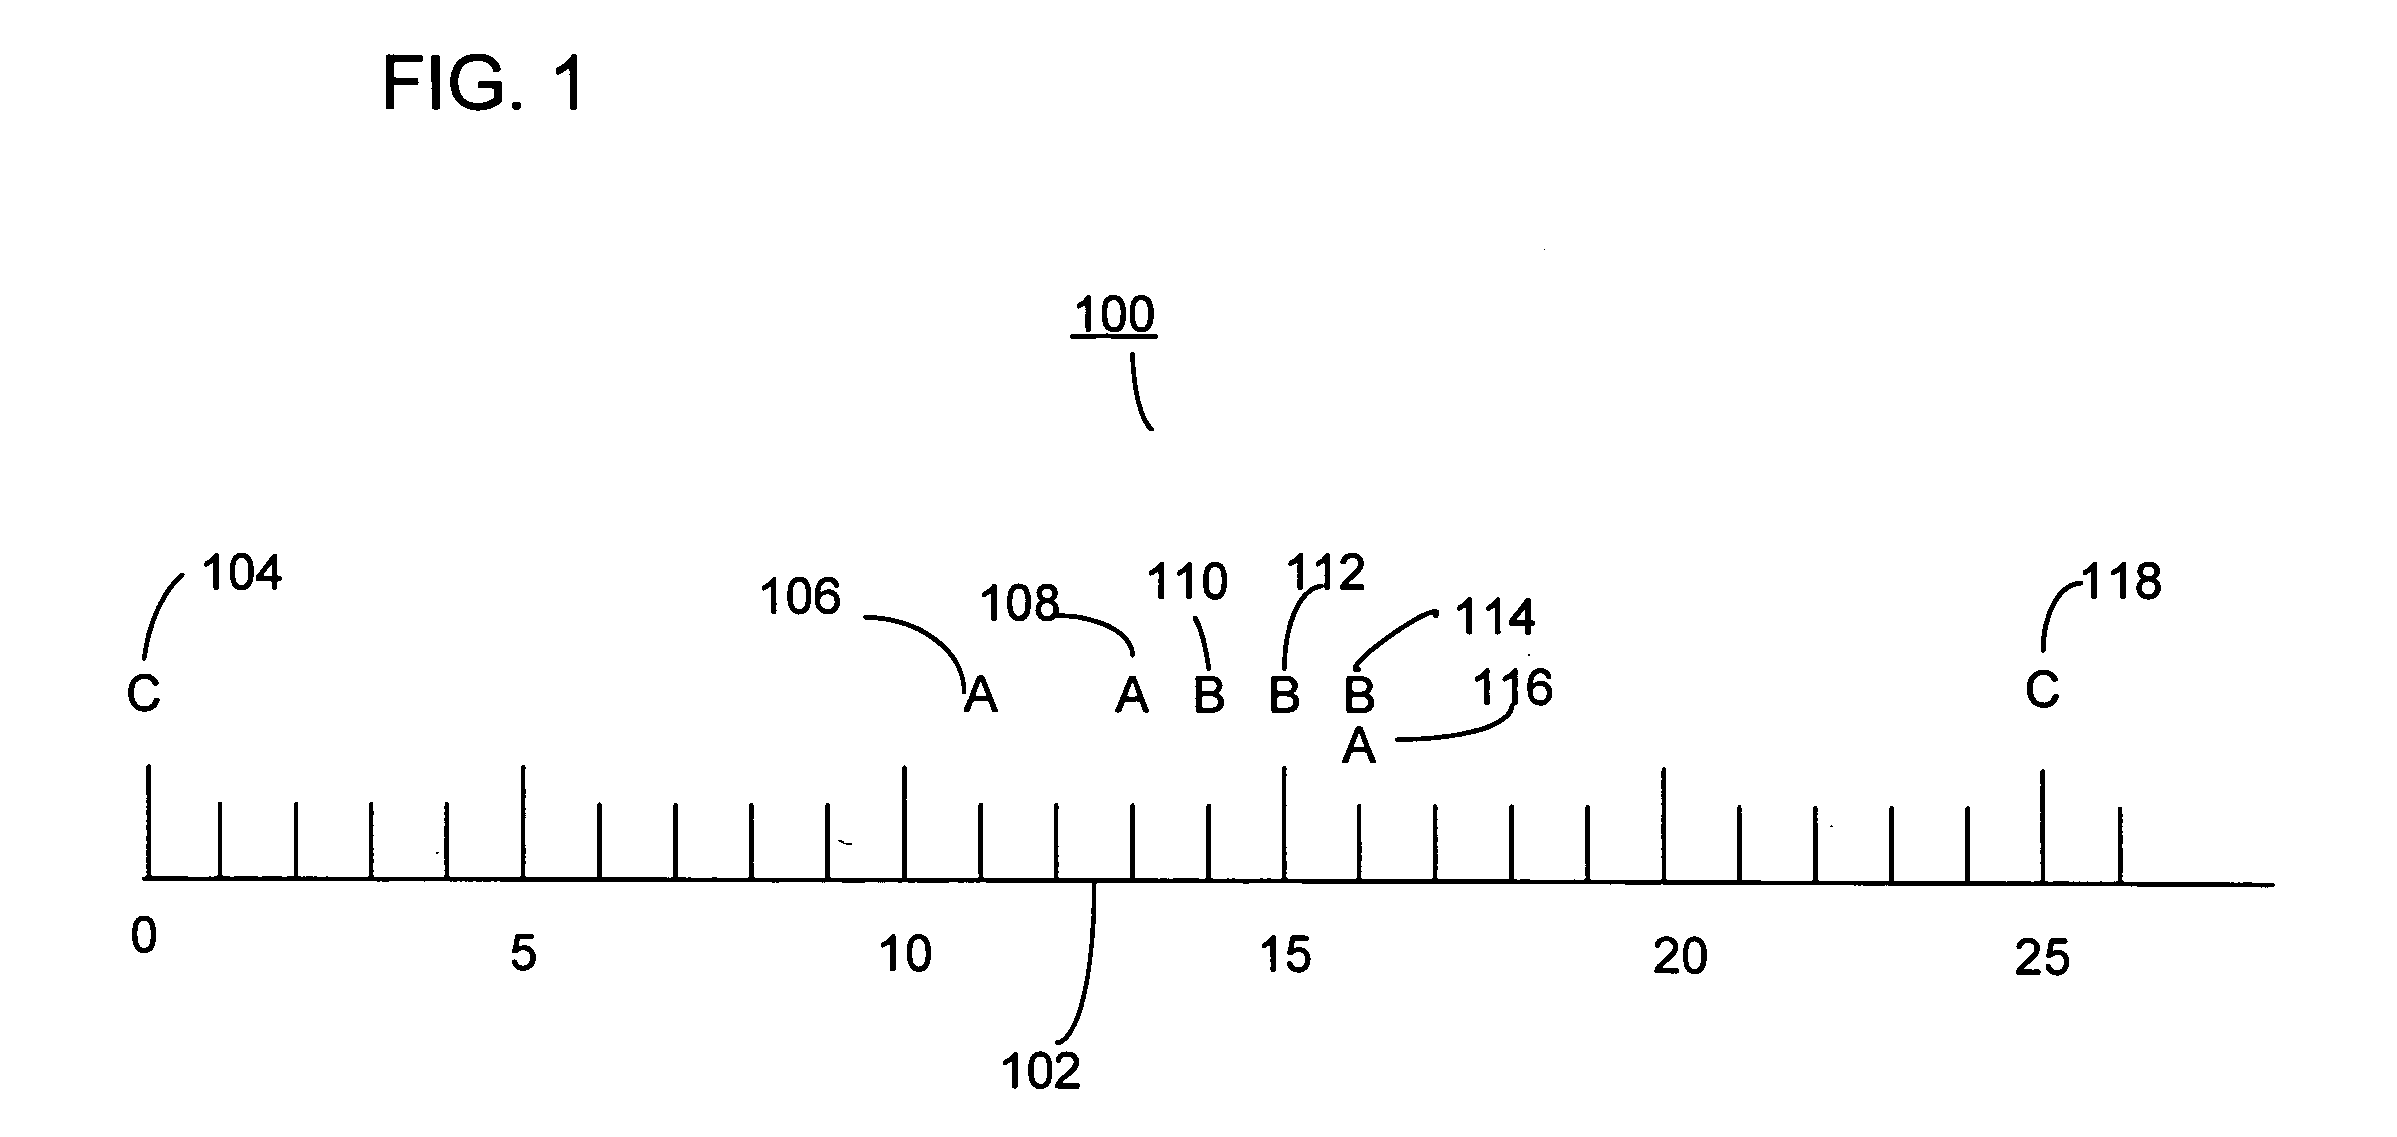 System and method for analyzing a pattern in a time-stamped event sequence